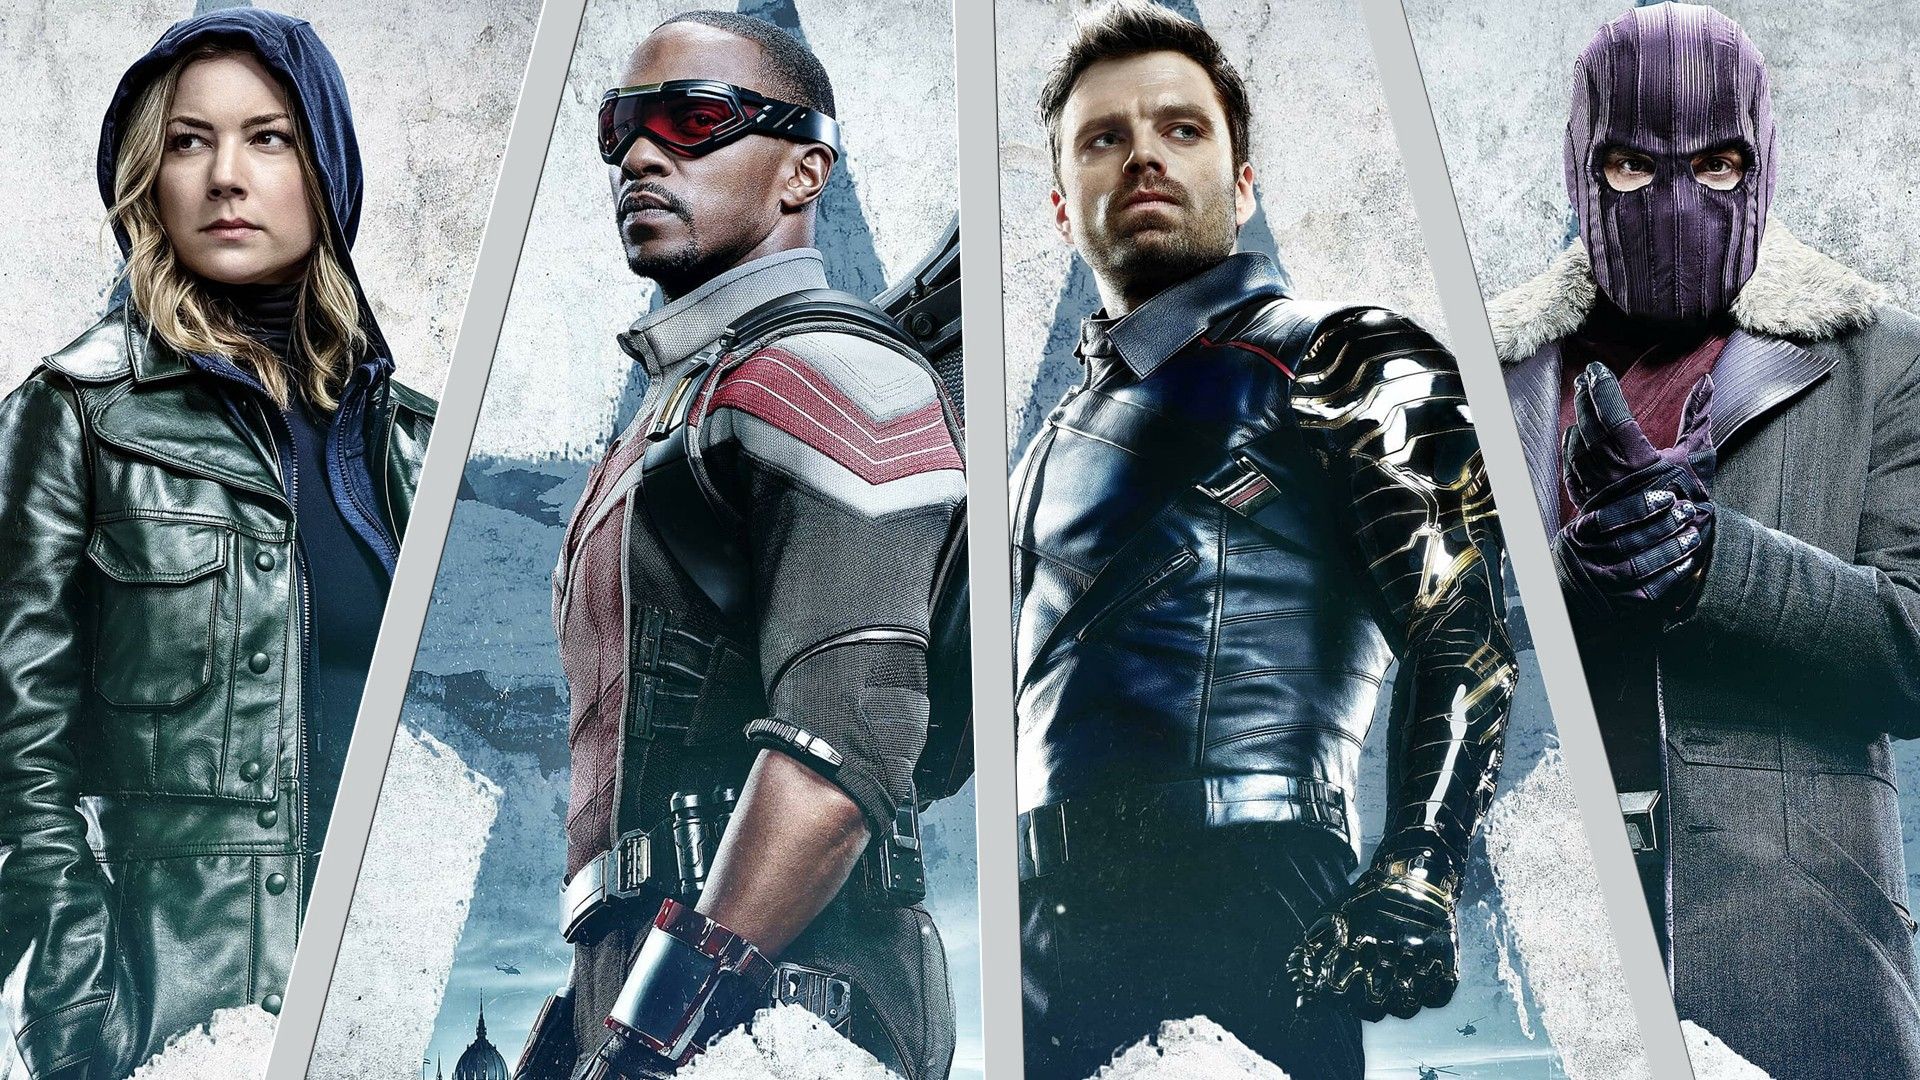 The Falcon and the Winter Soldier” Season 1 Episode 1